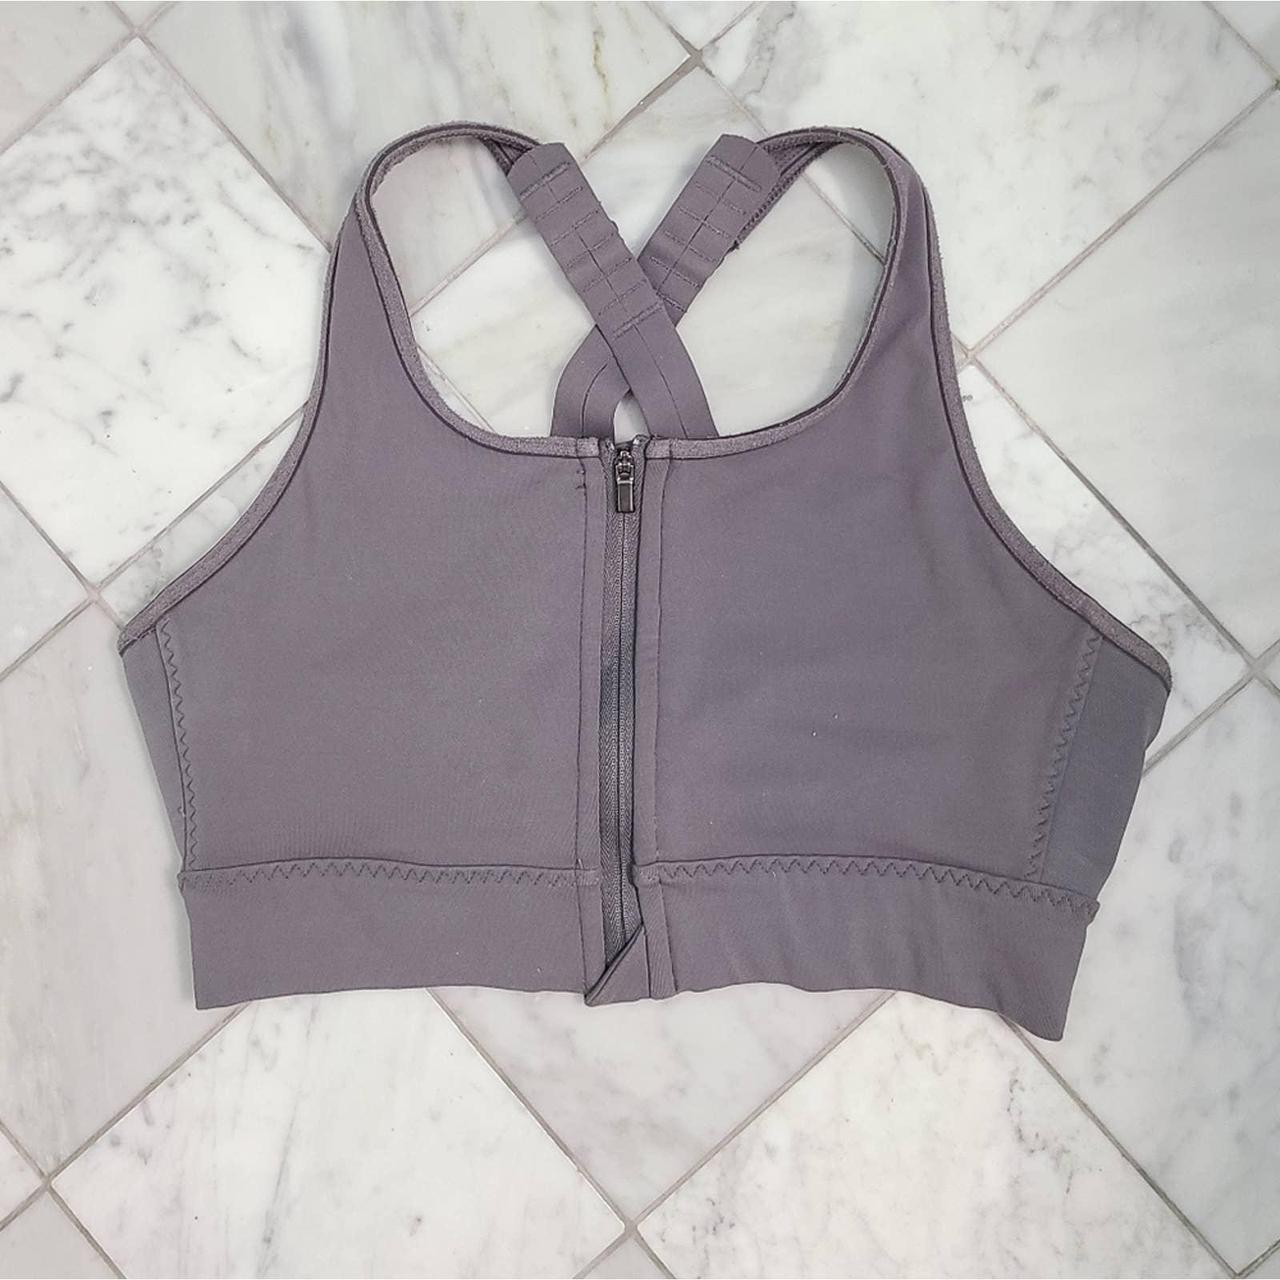 Athleta sports bra with zipper front and racerback... - Depop